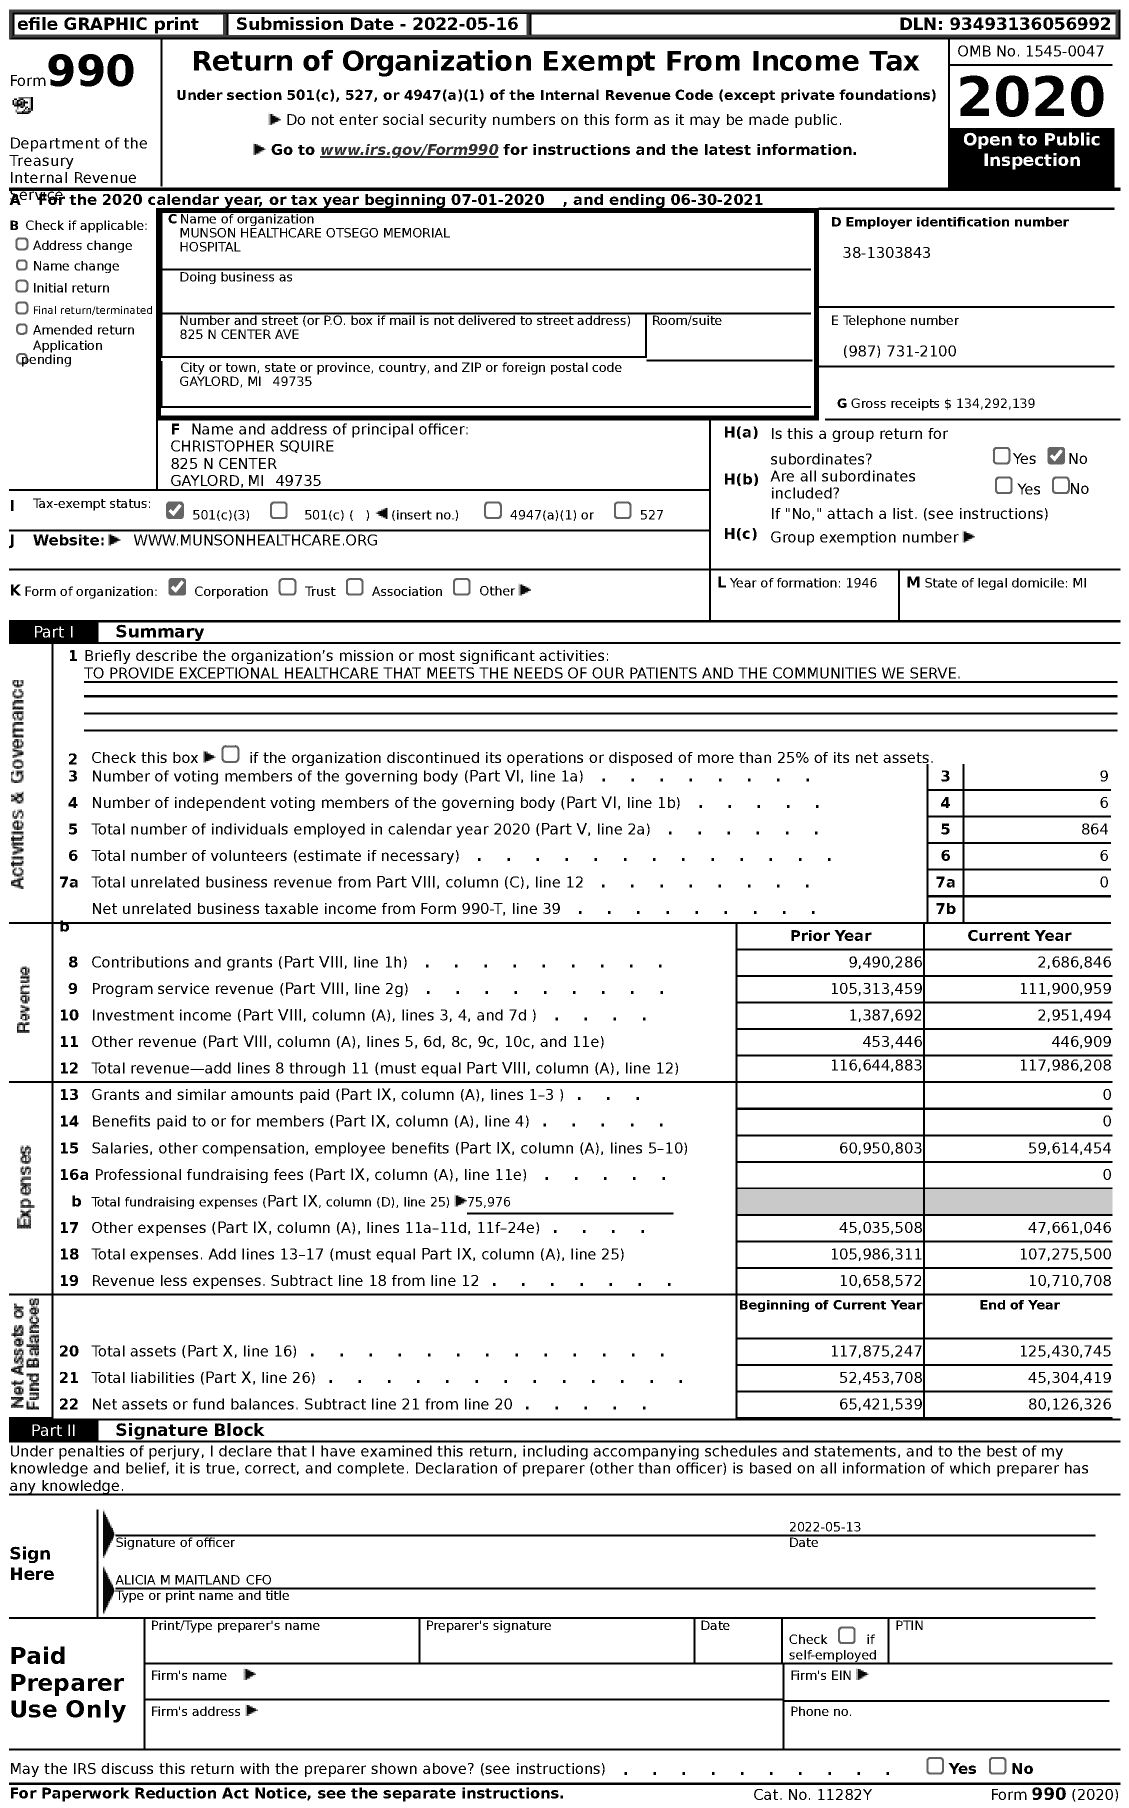 Image of first page of 2020 Form 990 for Munson Healthcare Otsego Memorial Hospital (OMH)